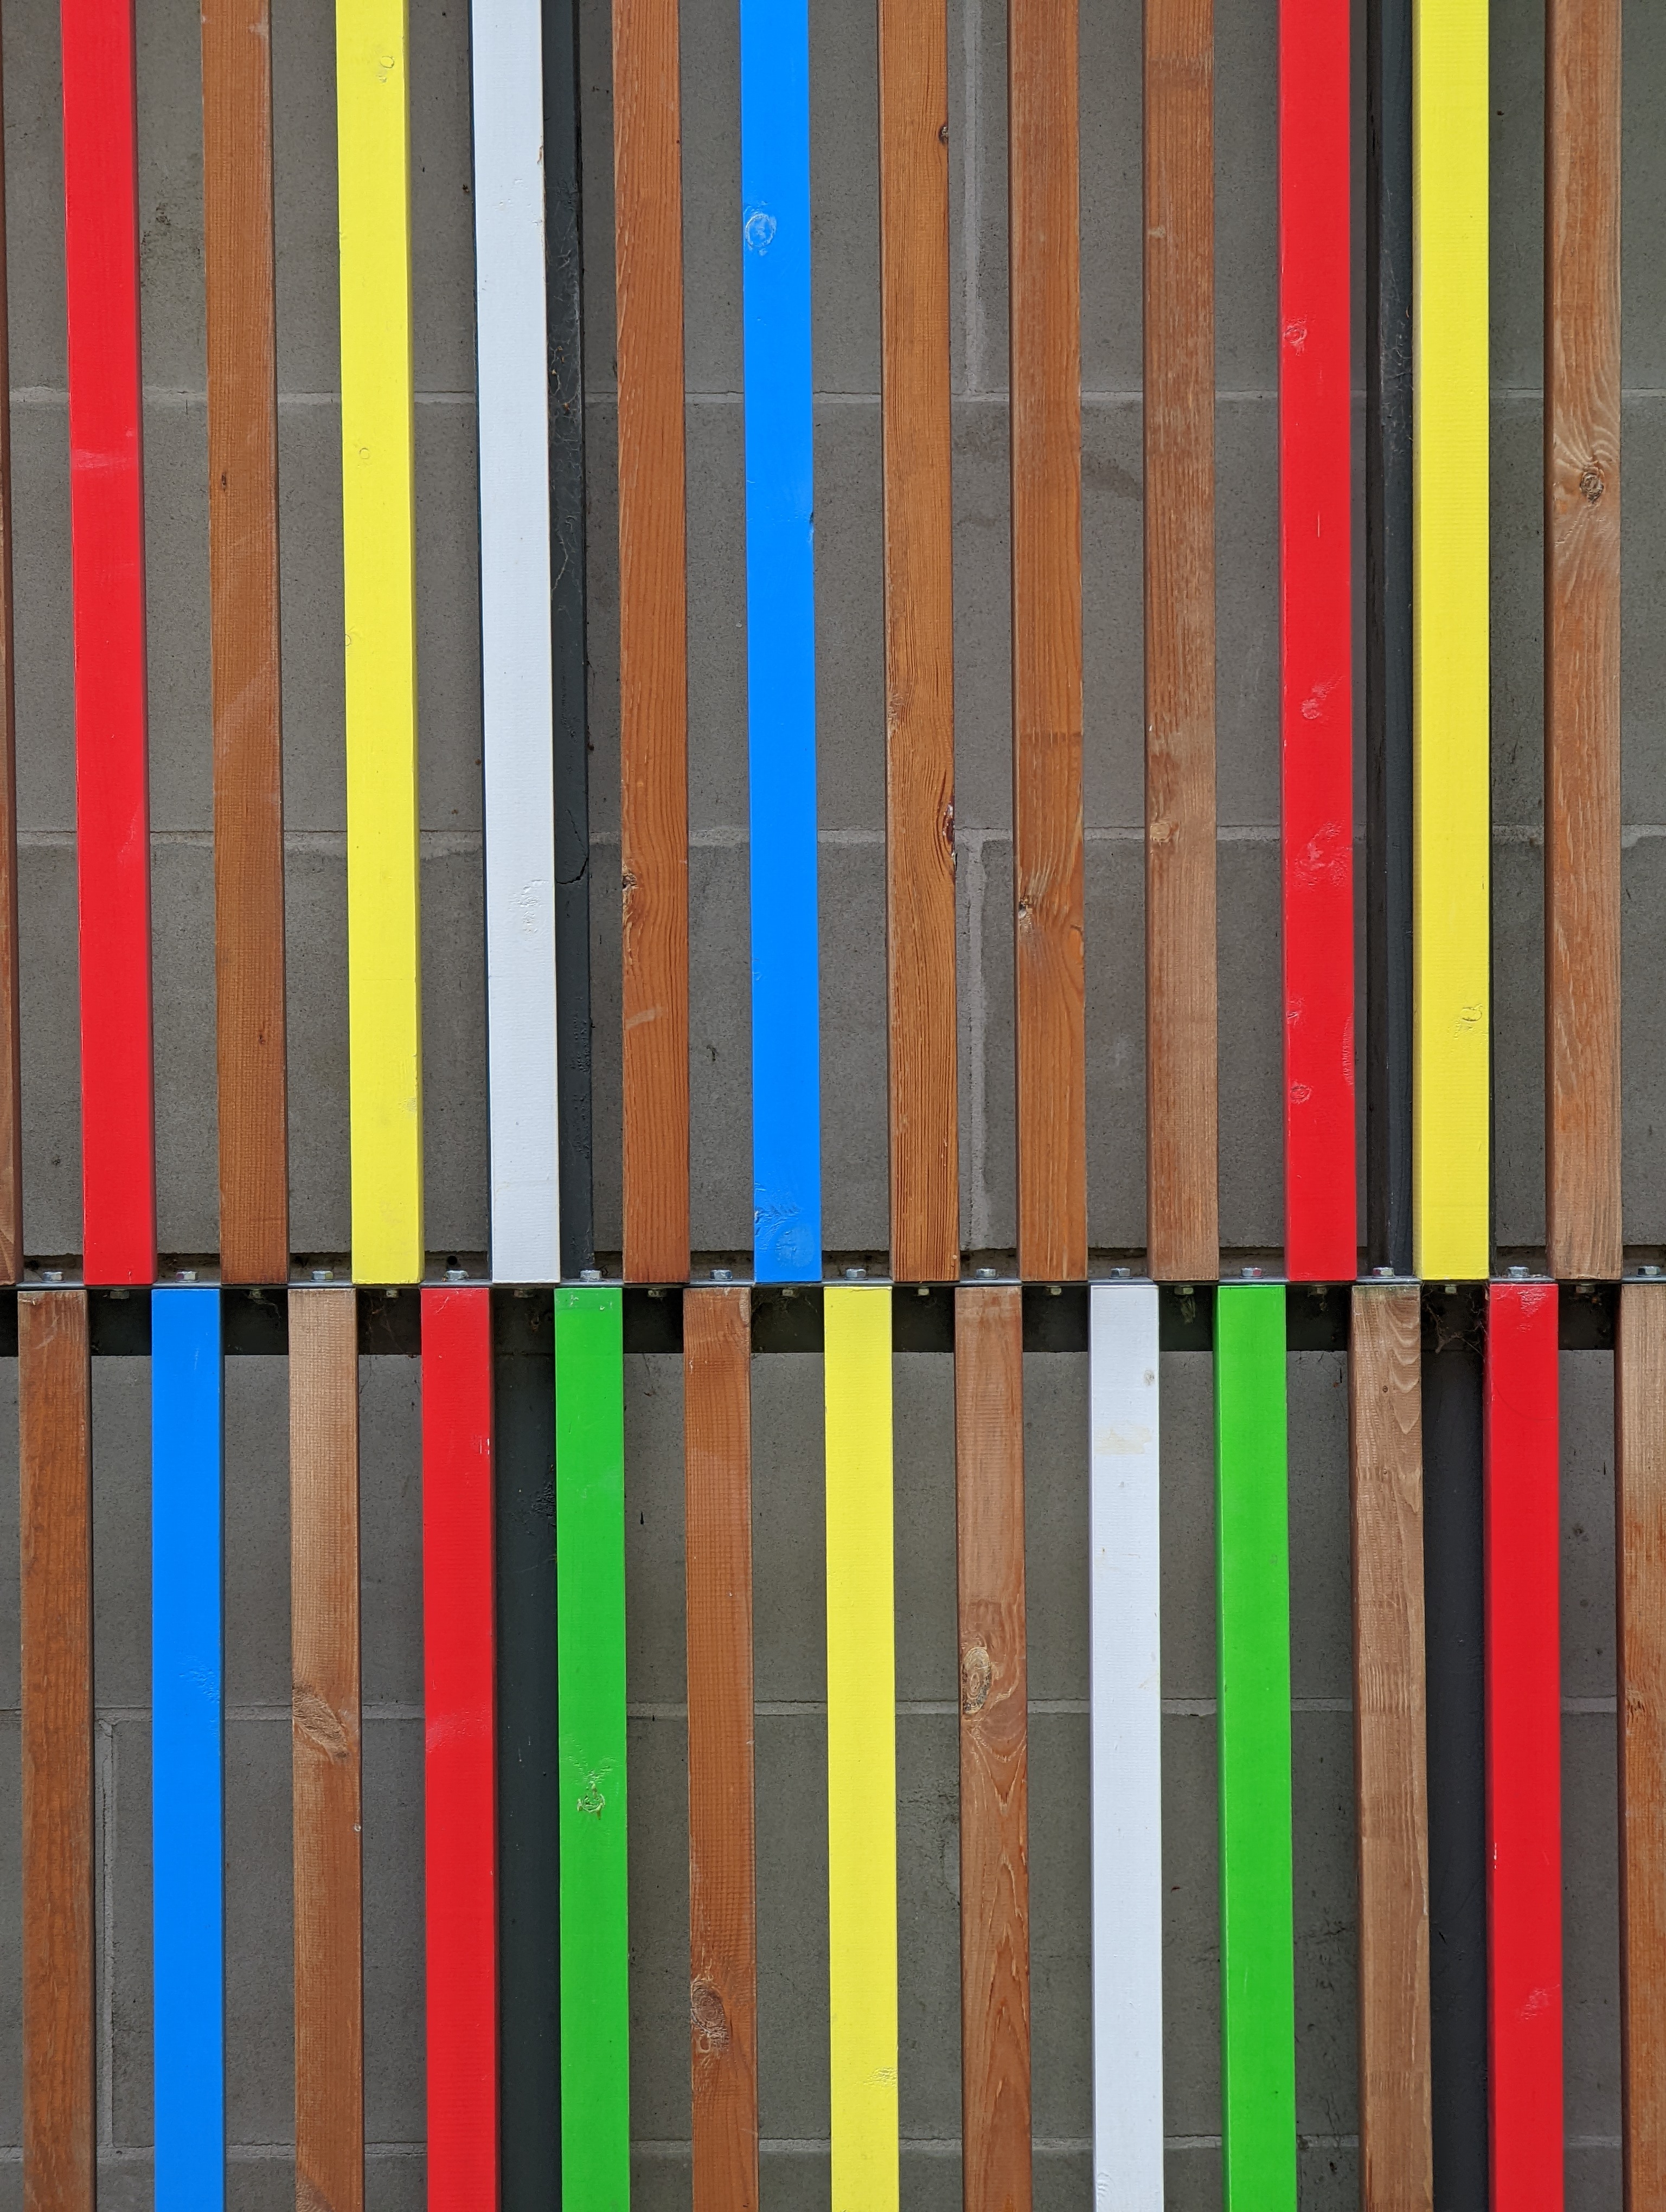 Google Pixel 6 Pro sample image of colored wooden slats attached to a building